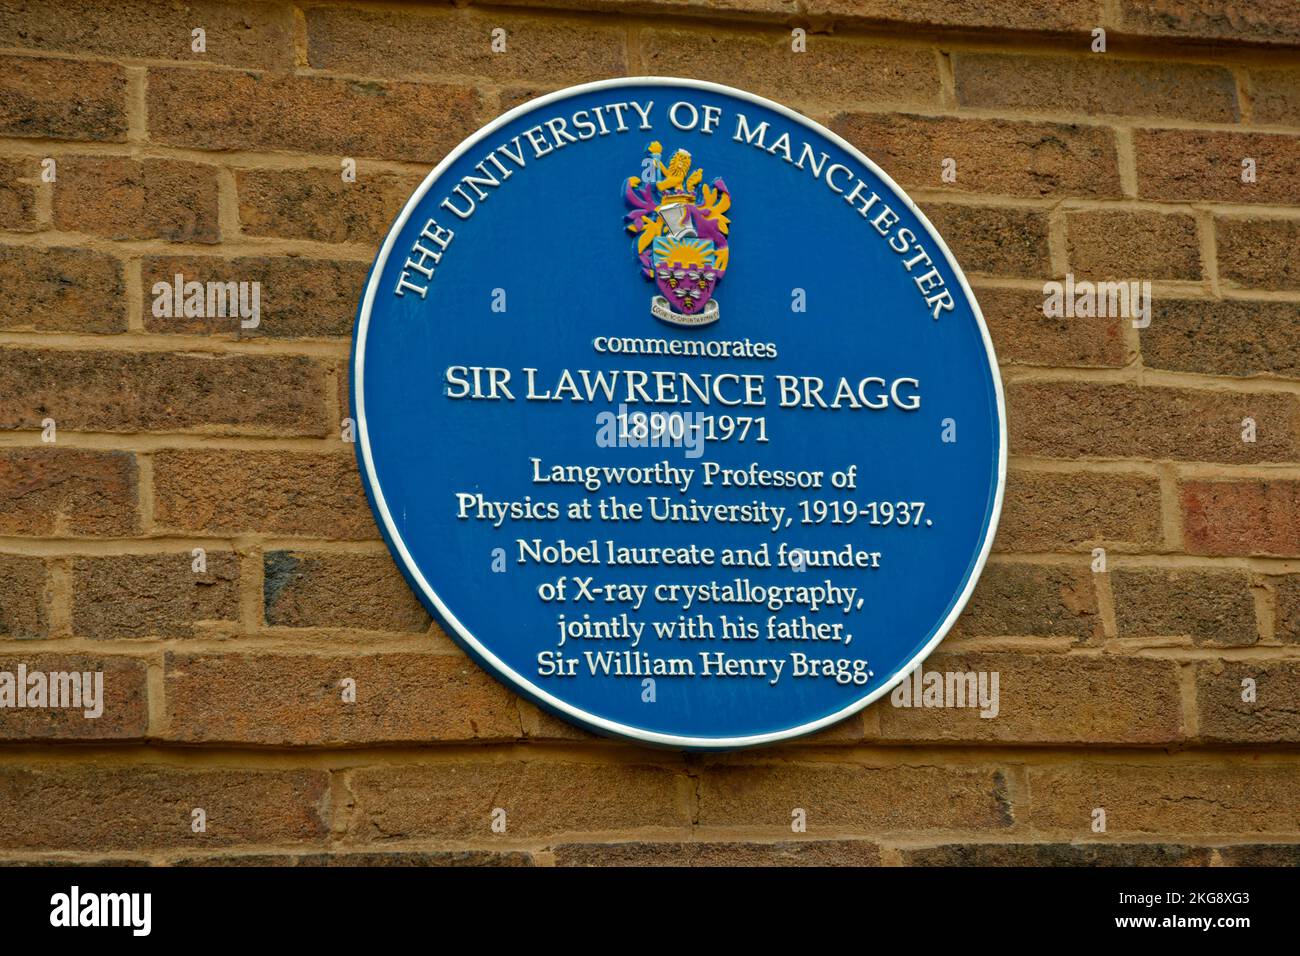 Blue Plate in Manchester University's Coupland Street celebrating work carried out there by Lawrence Bragg founder of X-ray crystallography. Stock Photo